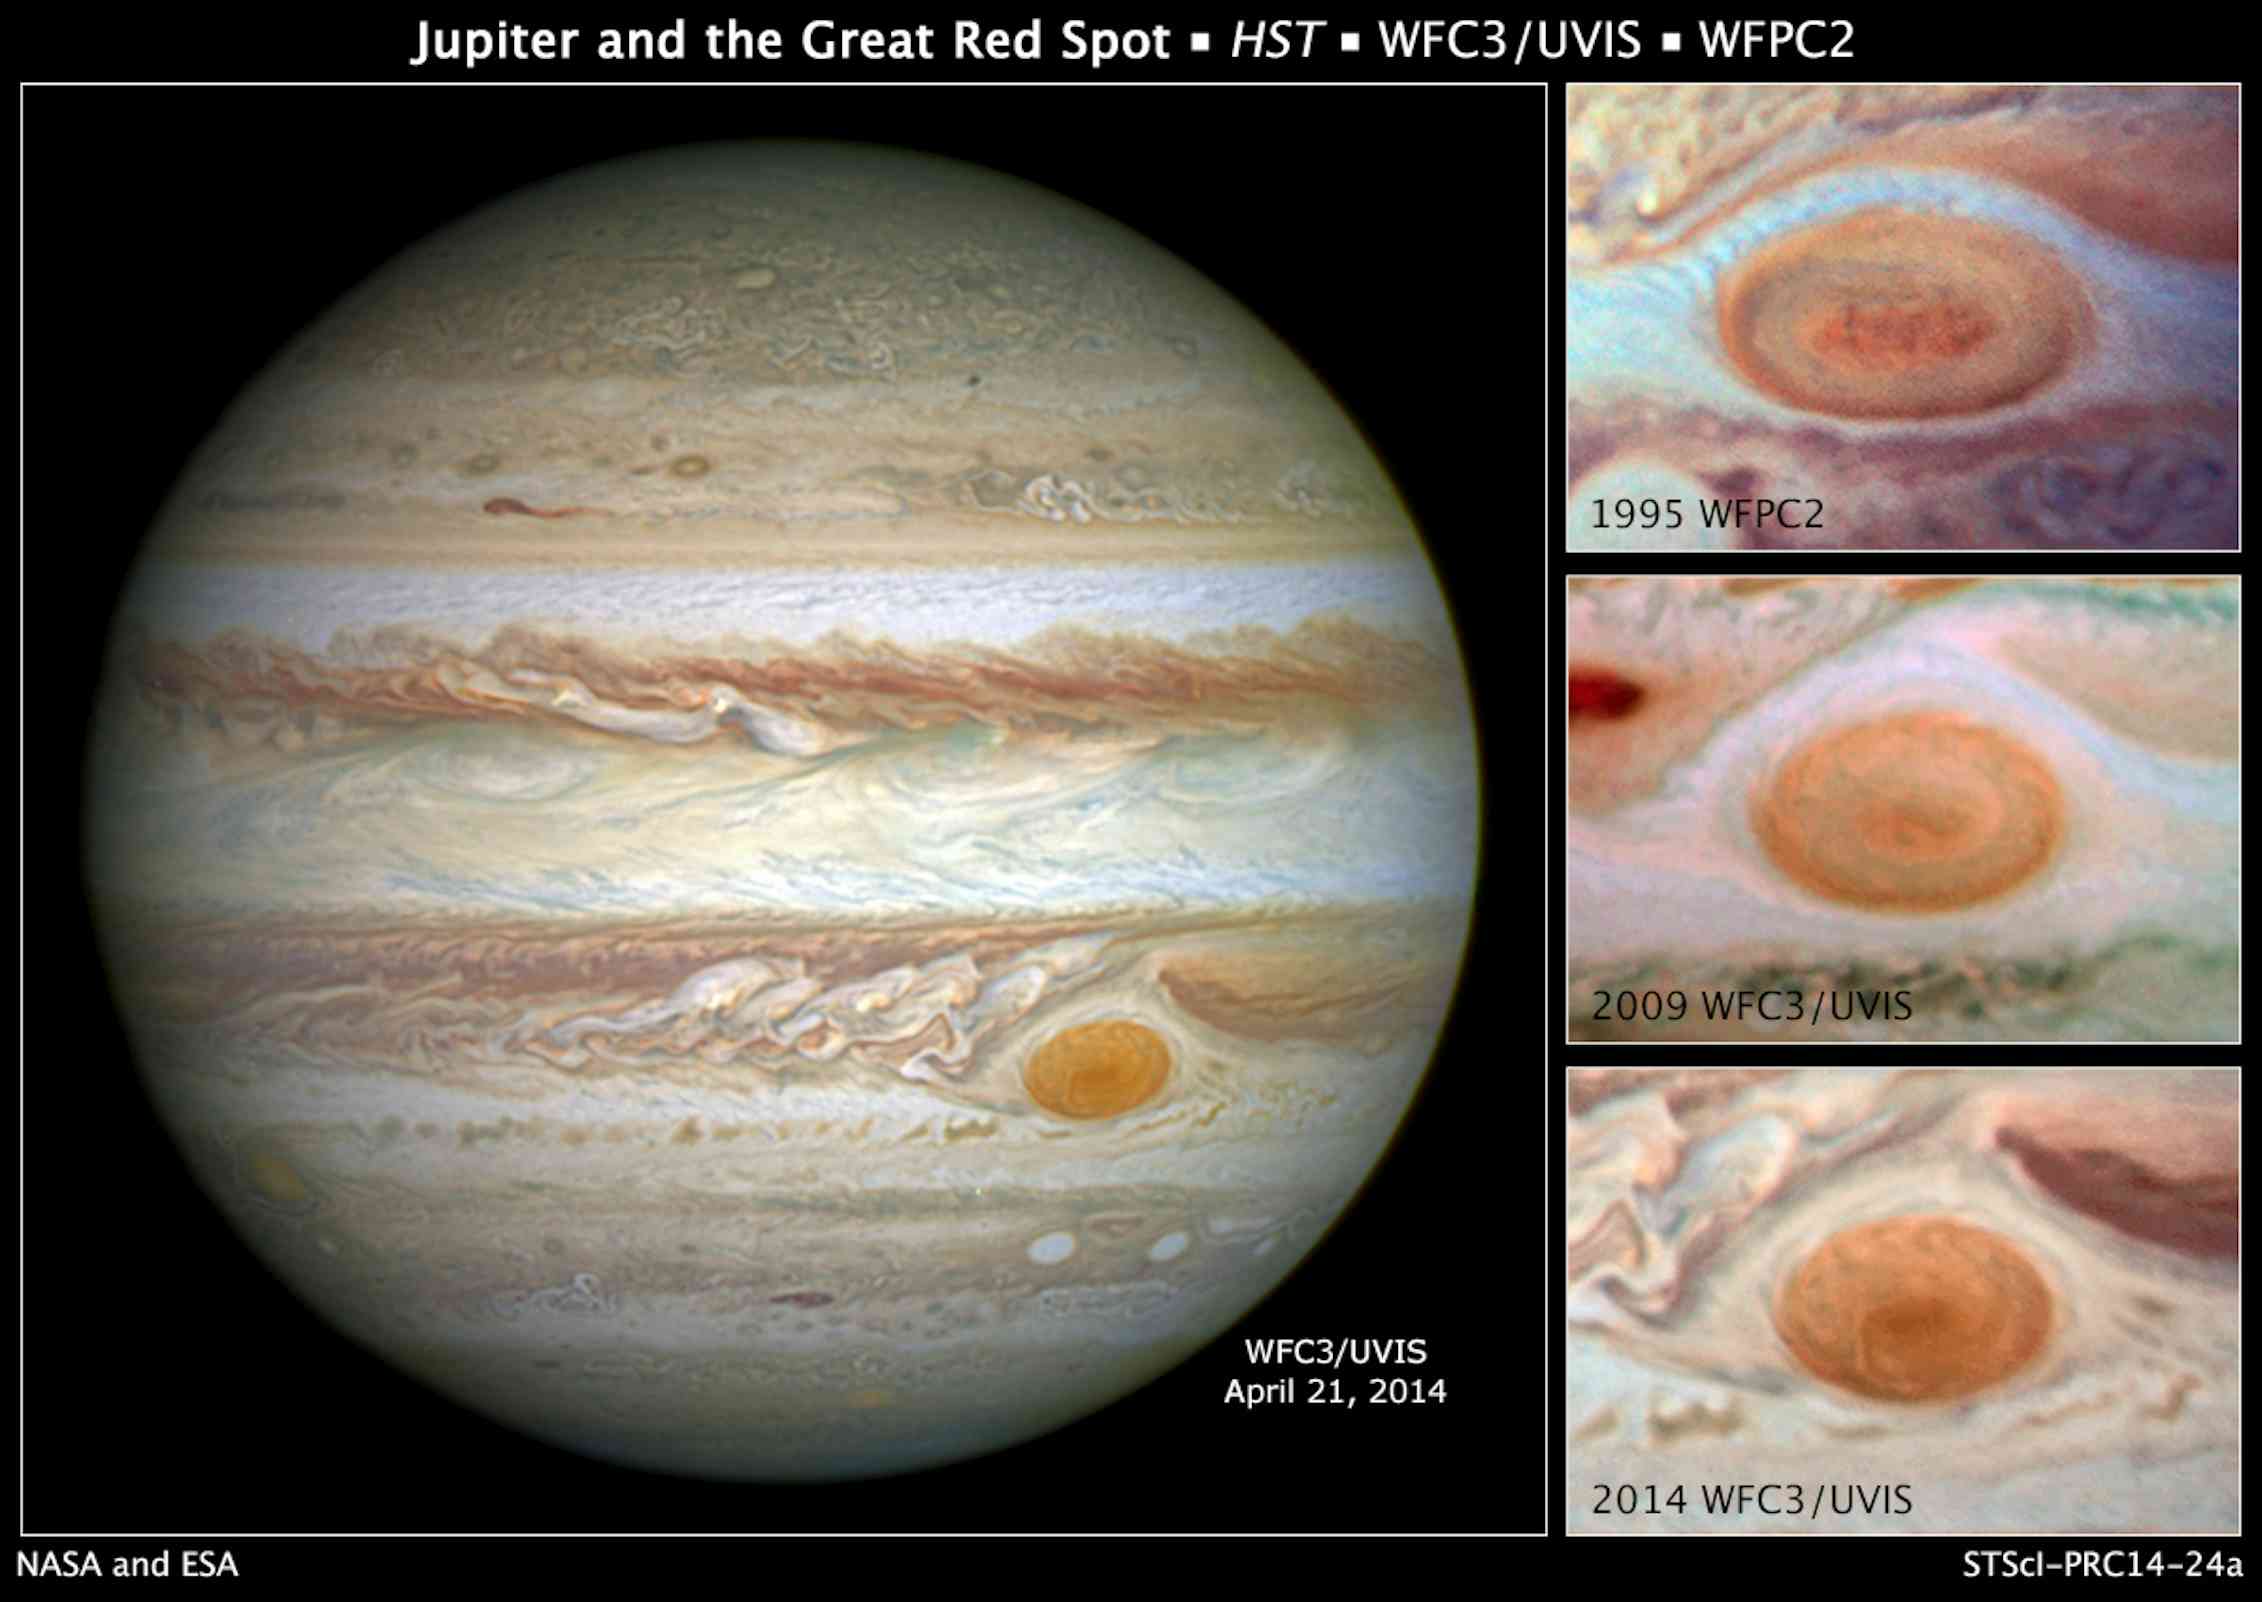 Jupiter's Great Red Spot could disappear in a generation